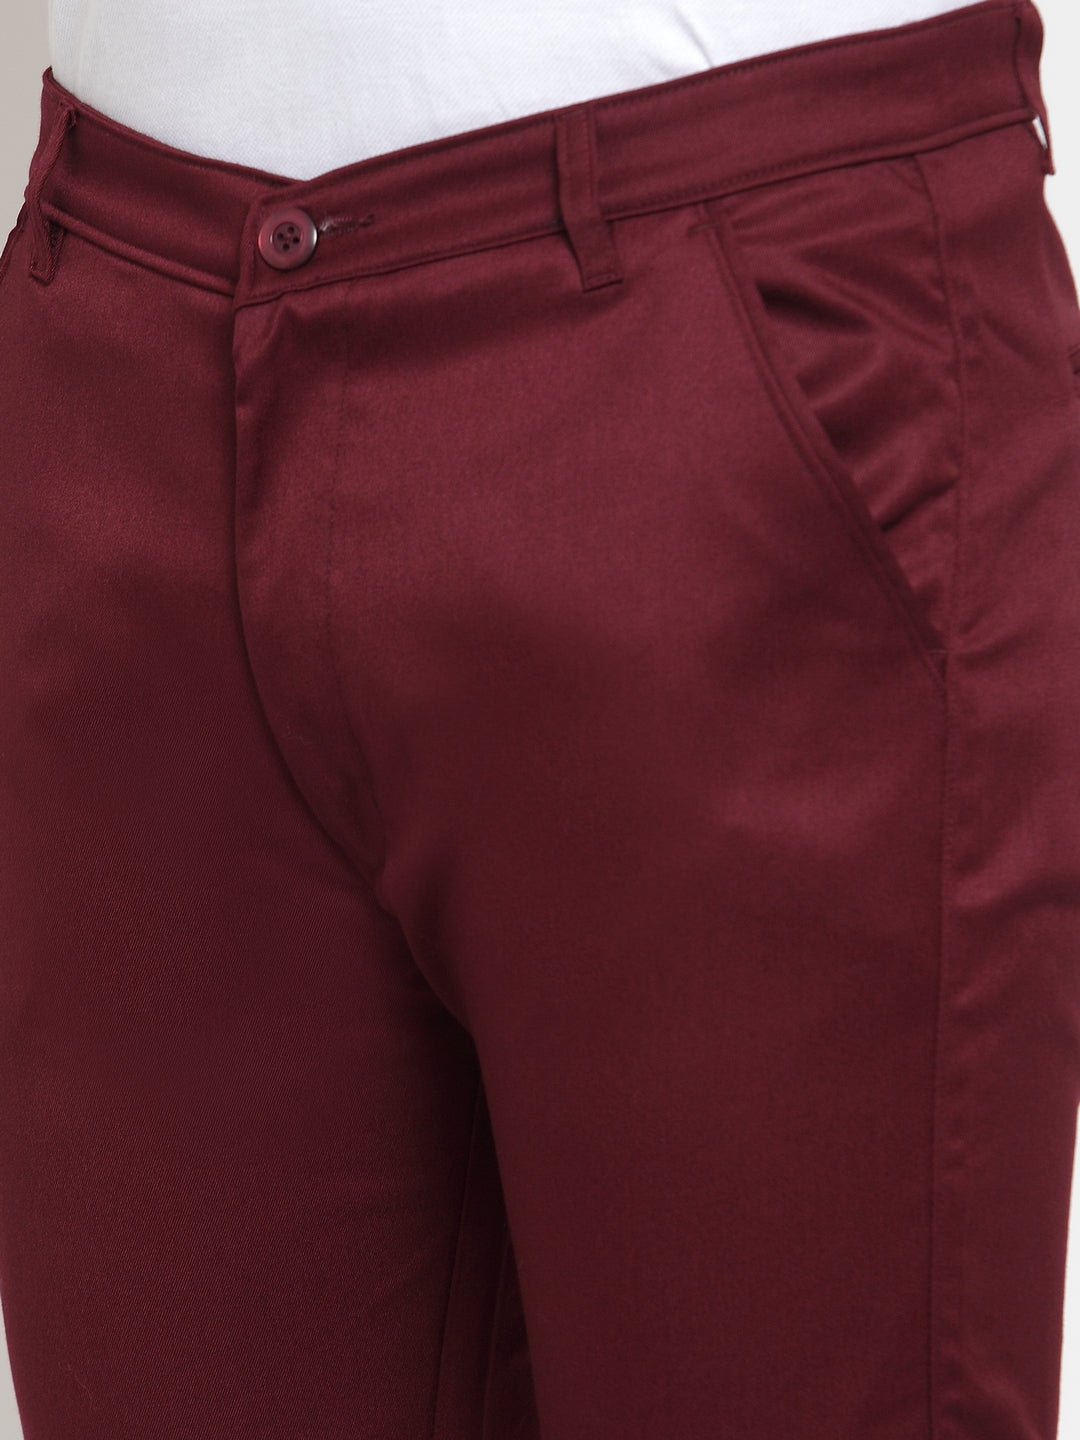 Men Maroon Trousers Price in India  Buy Men Maroon Trousers online at  Shopsyin